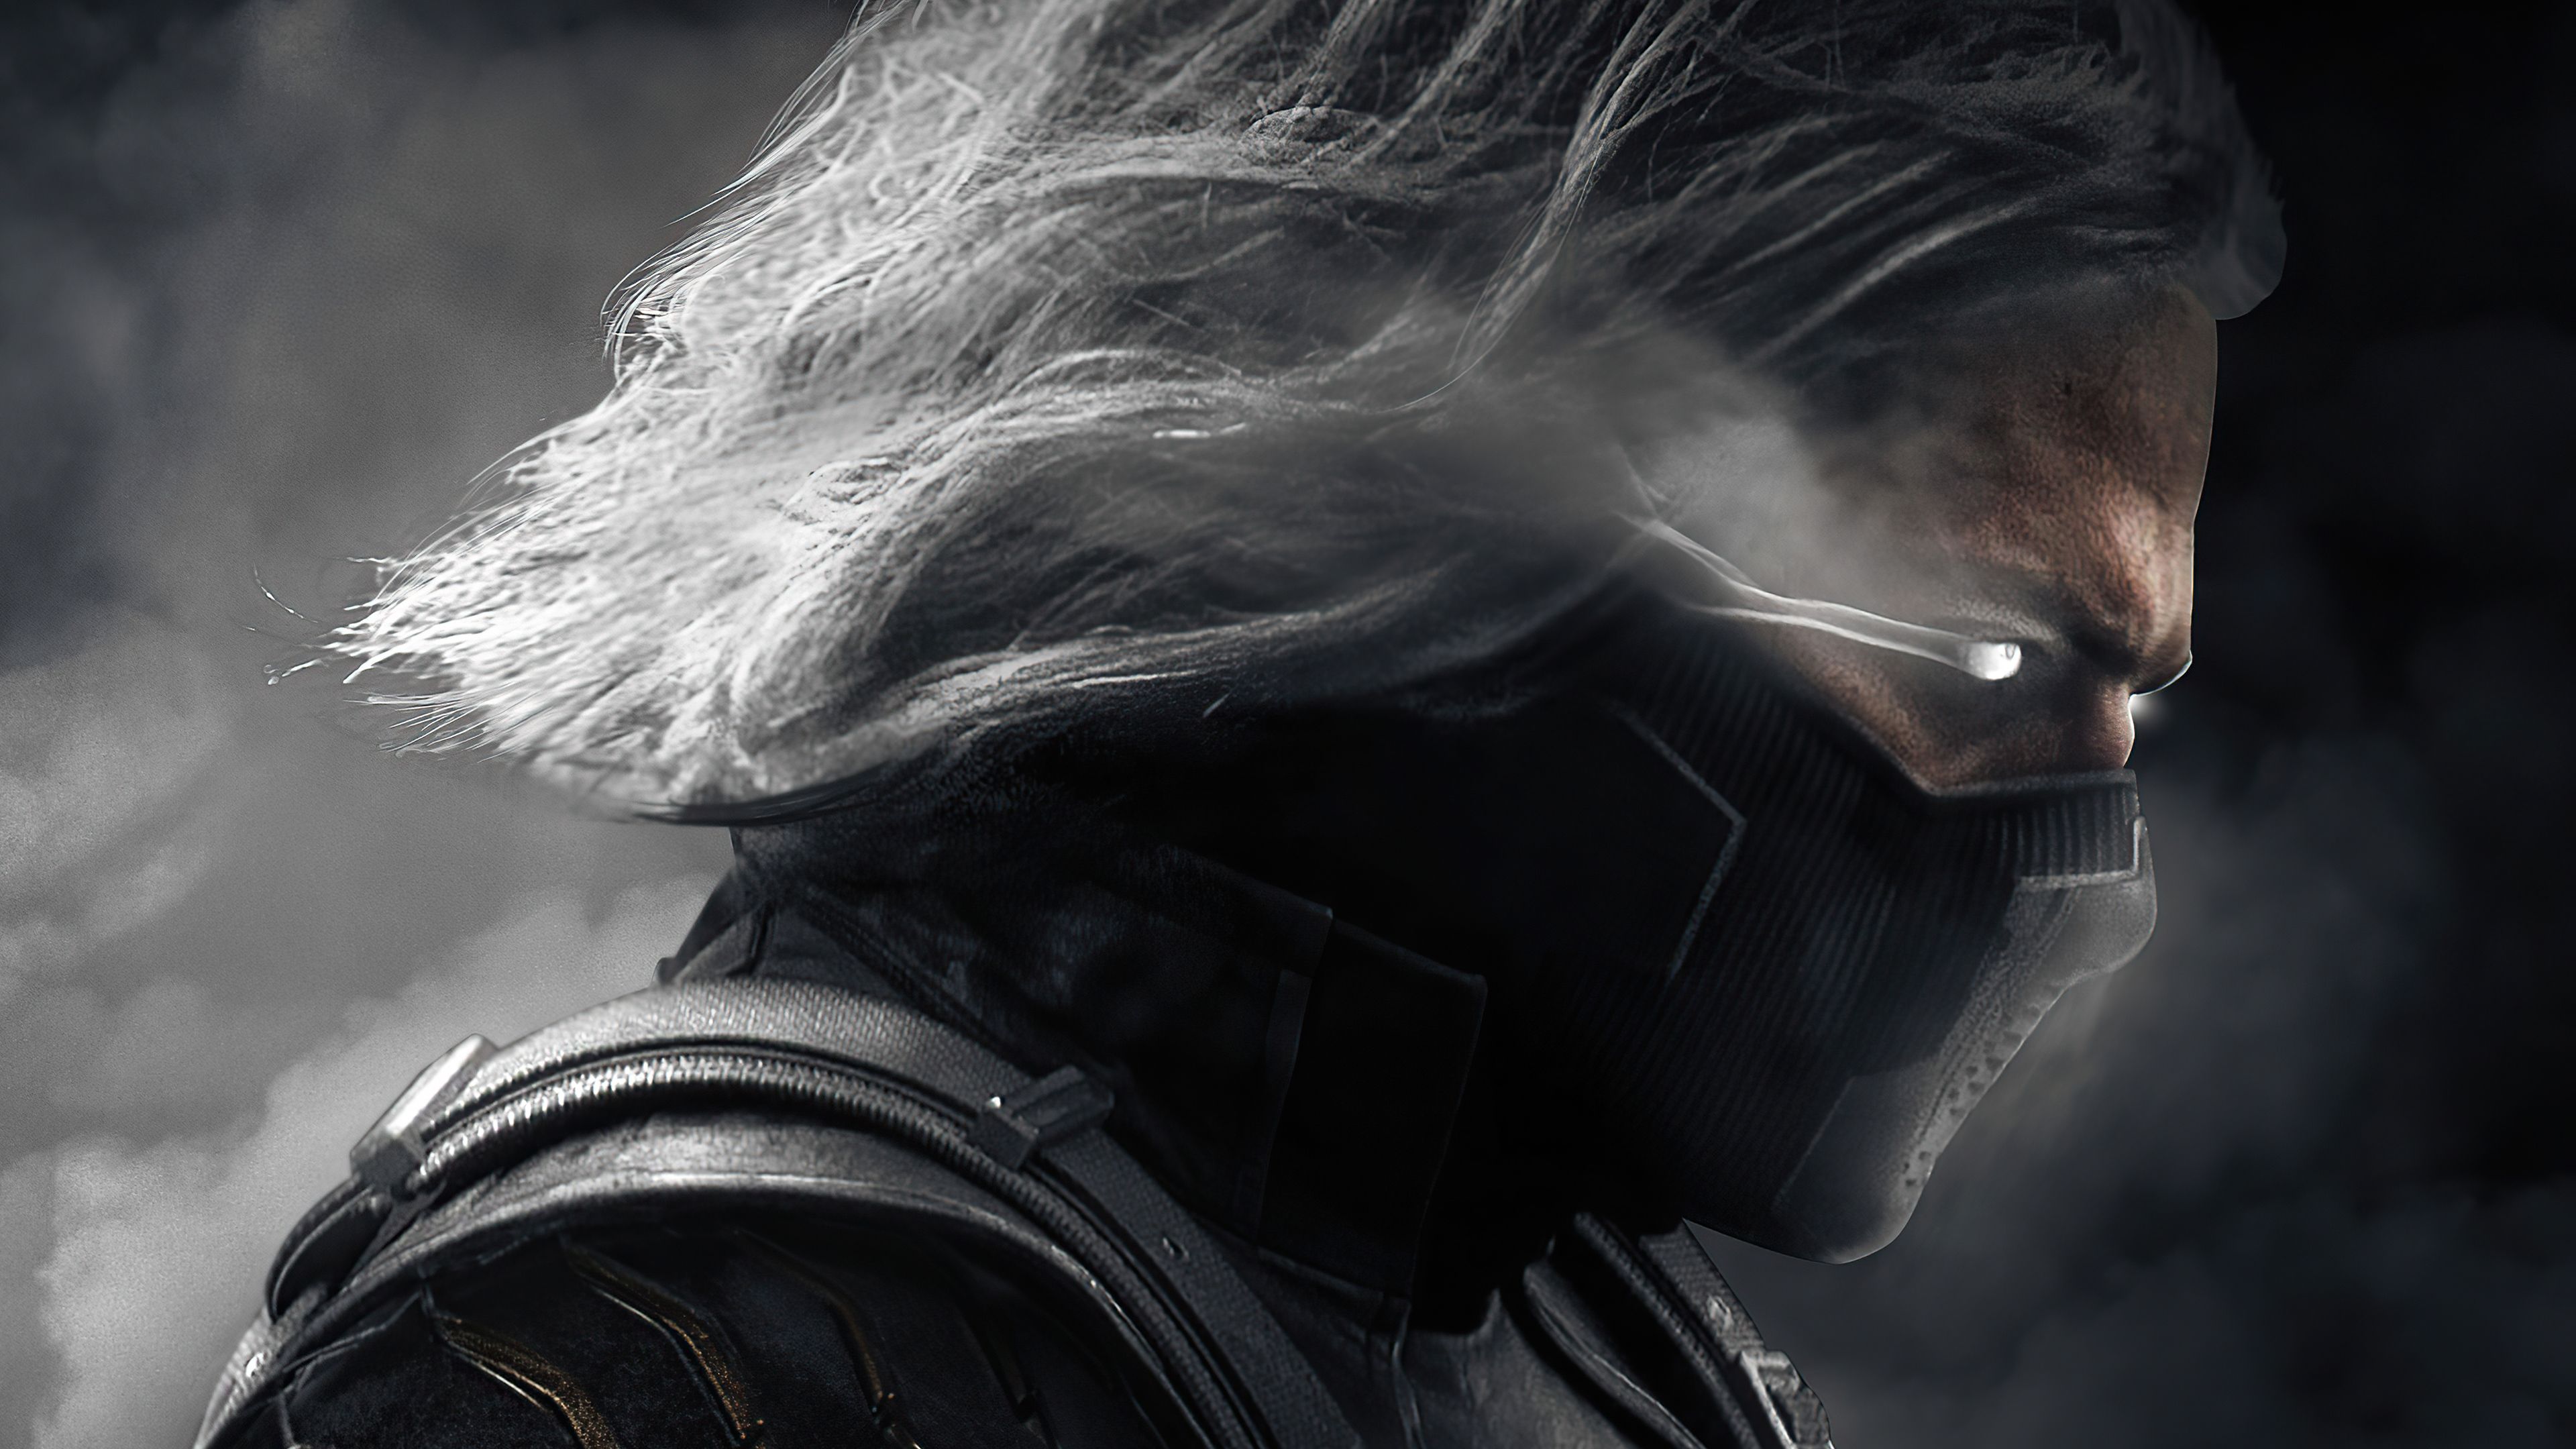 Smoke X Winter Soldier Mortal Kombat iPad Air HD 4k Wallpaper, Image, Background, Photo and Picture